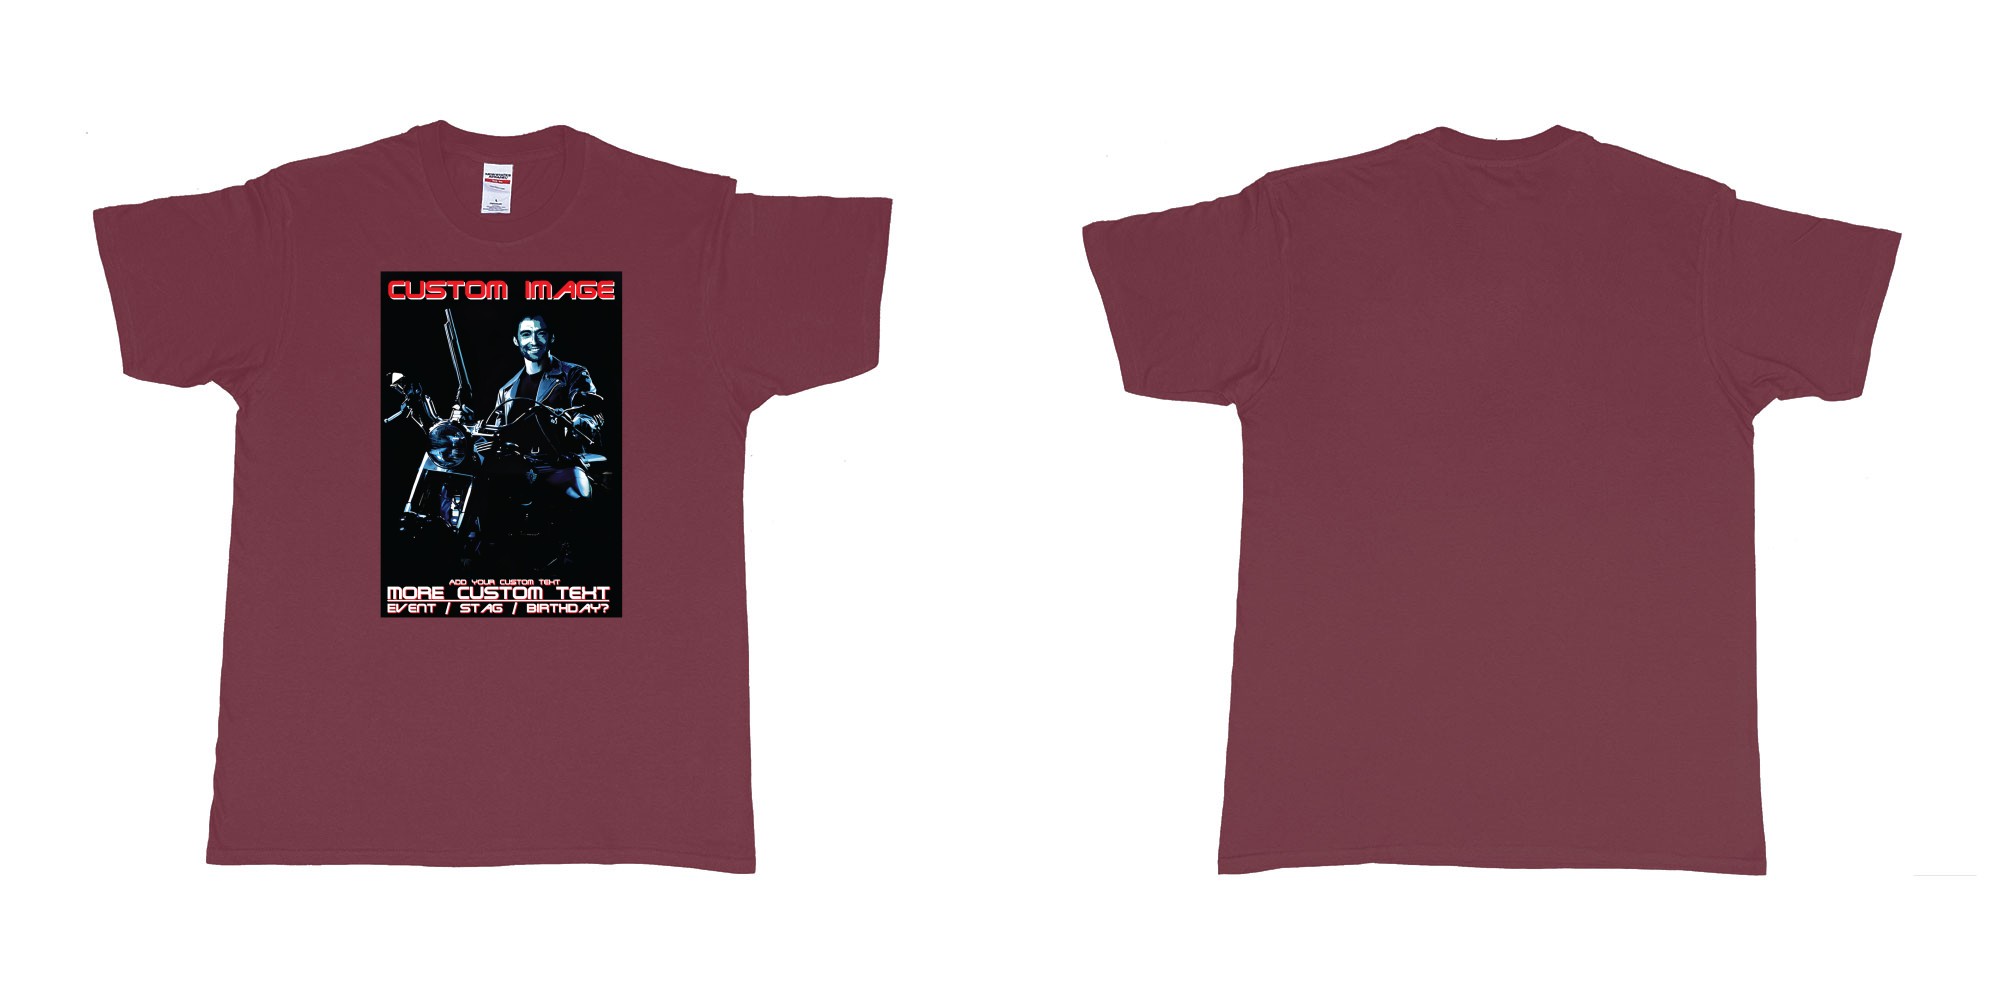 Custom tshirt design terminator 2 judgement day hugh jackman custom face in fabric color marron choice your own text made in Bali by The Pirate Way